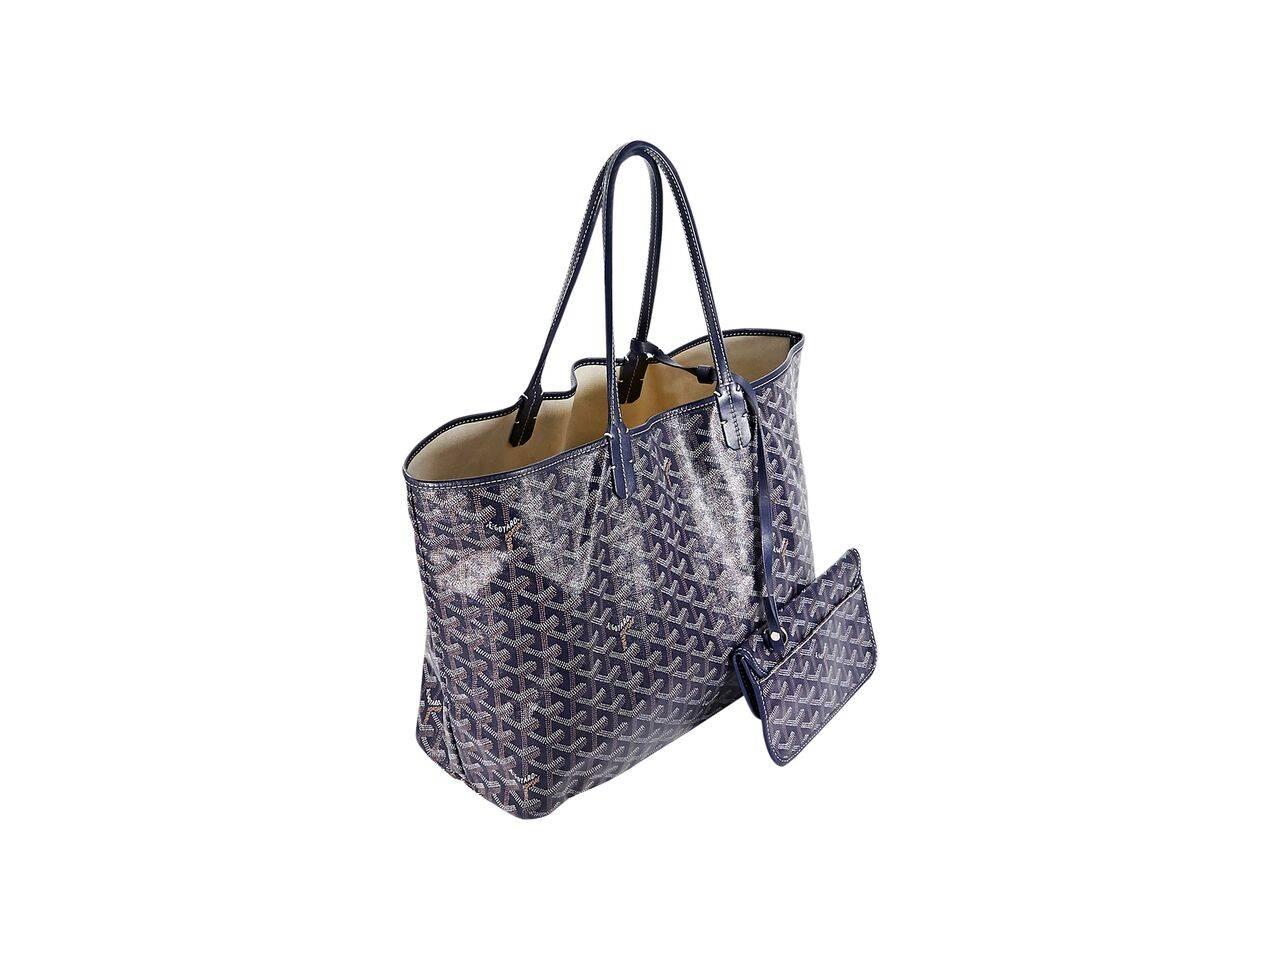 Product details:  Navy blue St. Louis PM tote bag by Goyard.  Dual shoulder straps.  Open top.  Attached matching snap pouch.  14